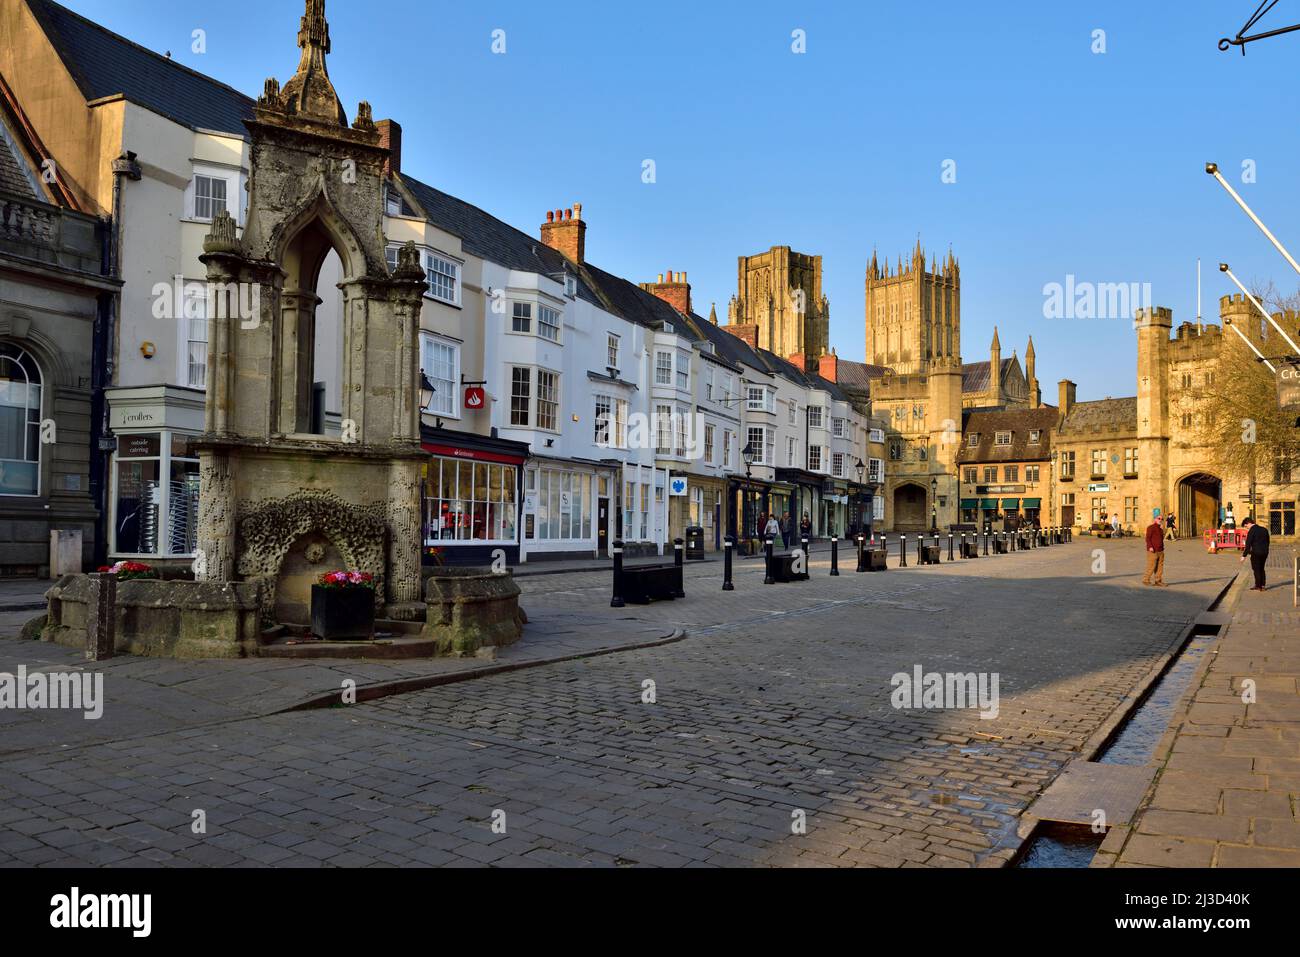 Wells market with market cross and fountain, Somerset, UK. Cathedral in background. Stock Photo